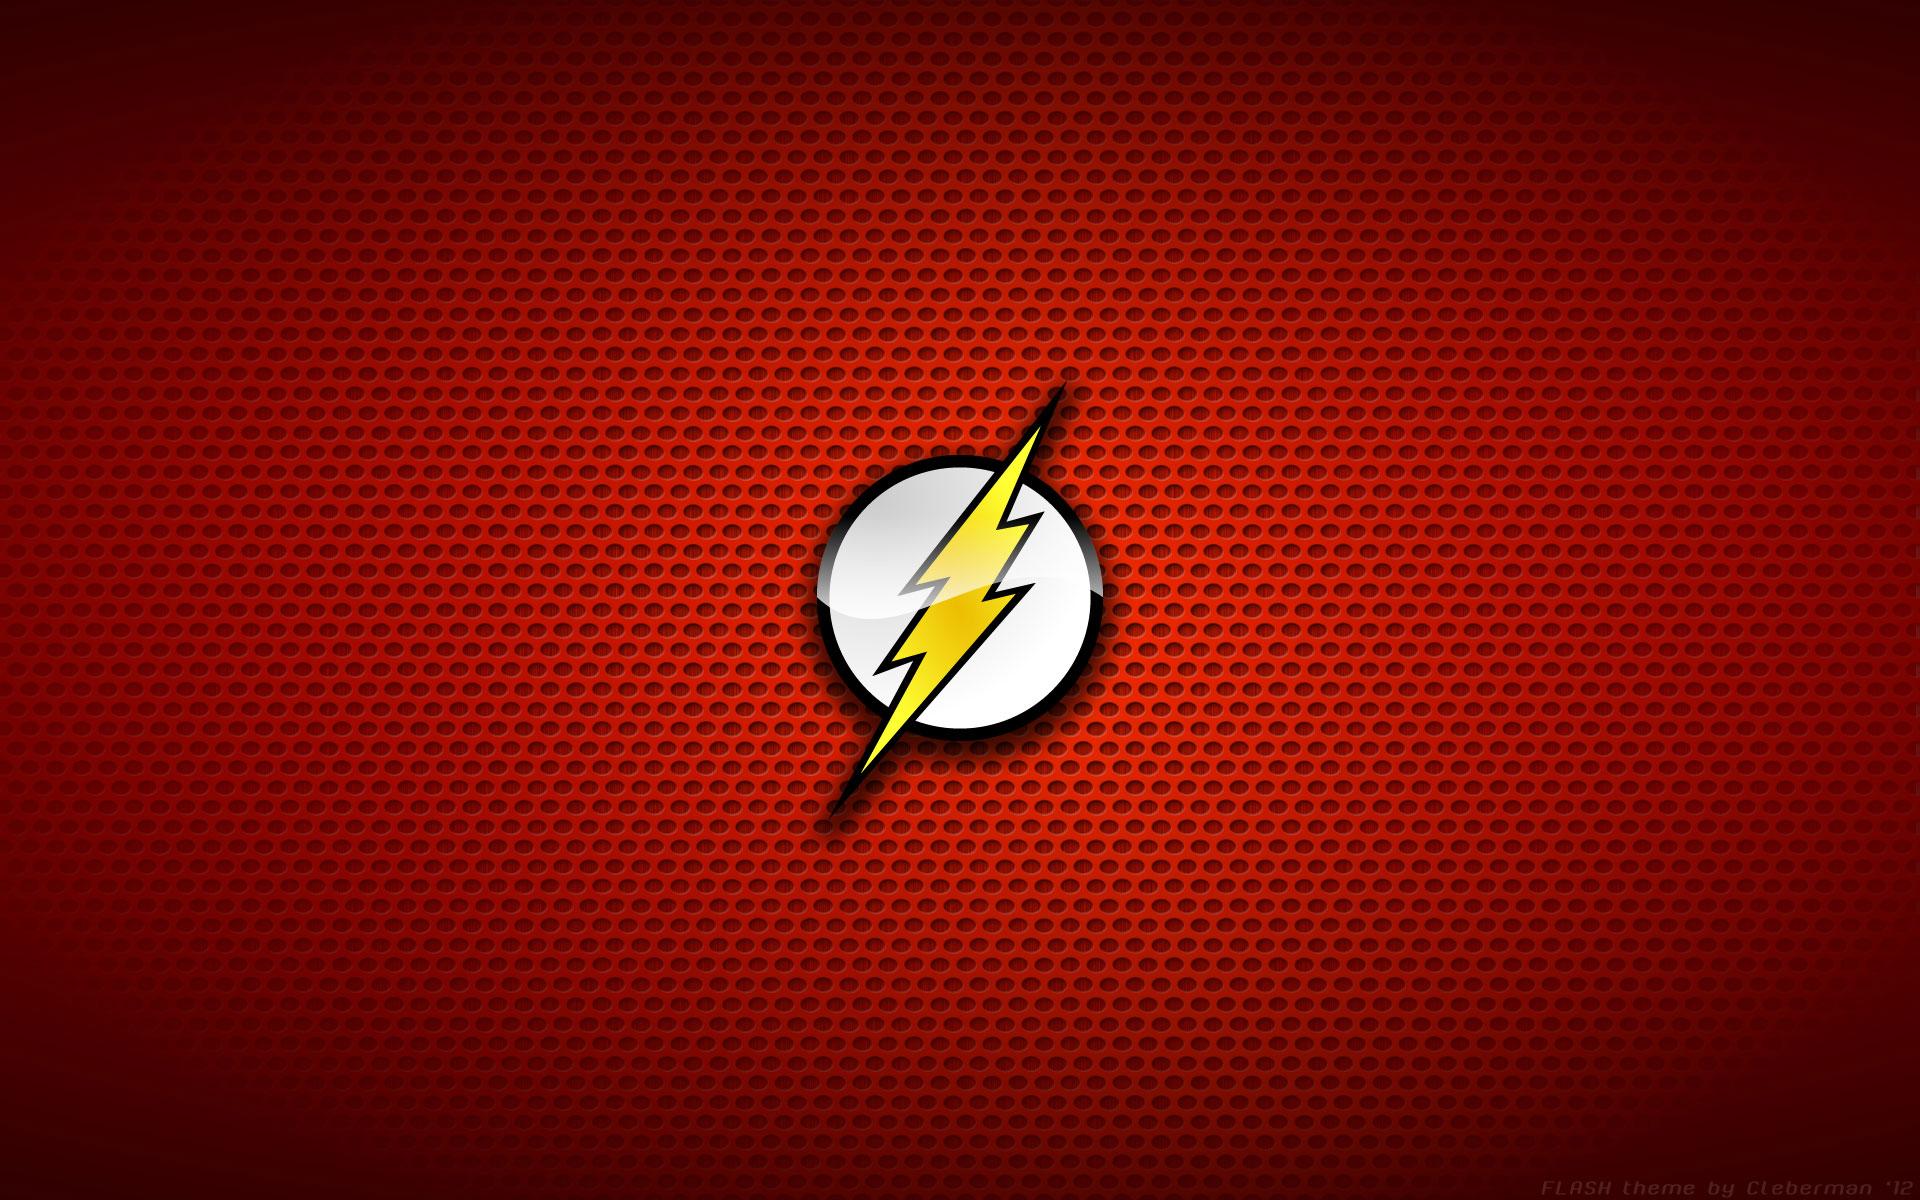 The Flash Wallpapers Archives - Page 4 of 9 - WideWallpaper.info ...